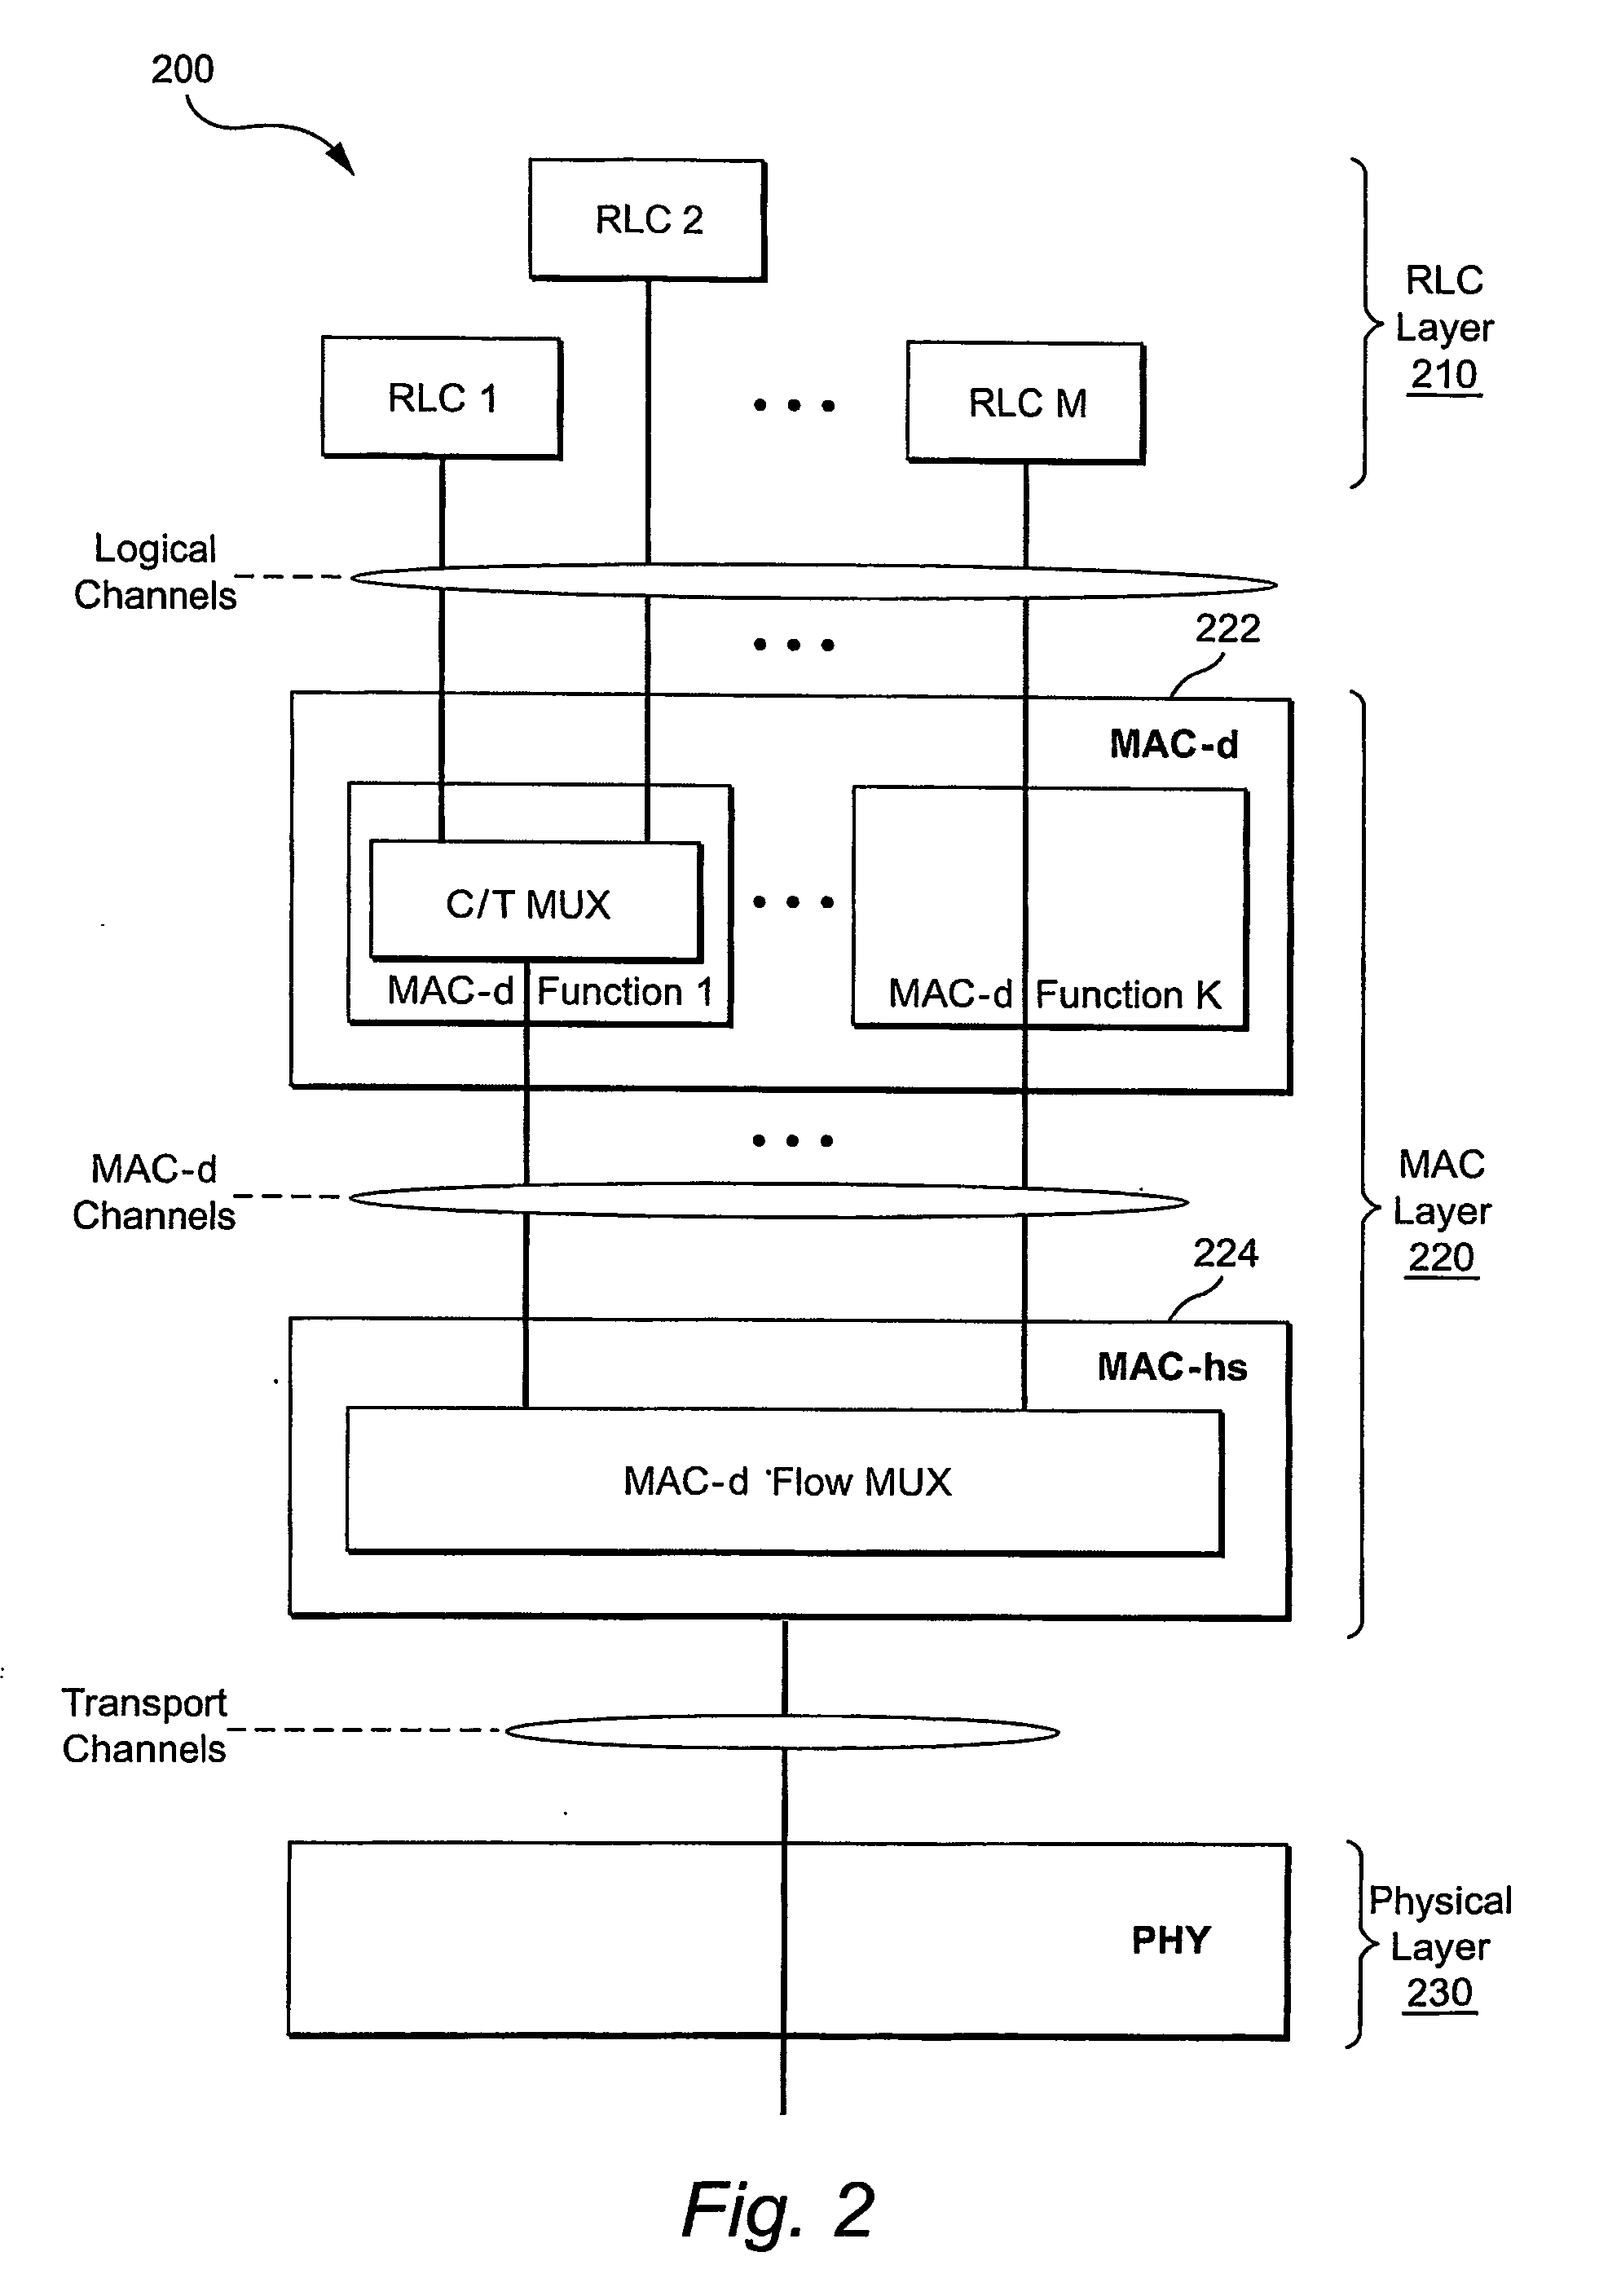 Medium access control priority-based scheduling for data units in a data flow